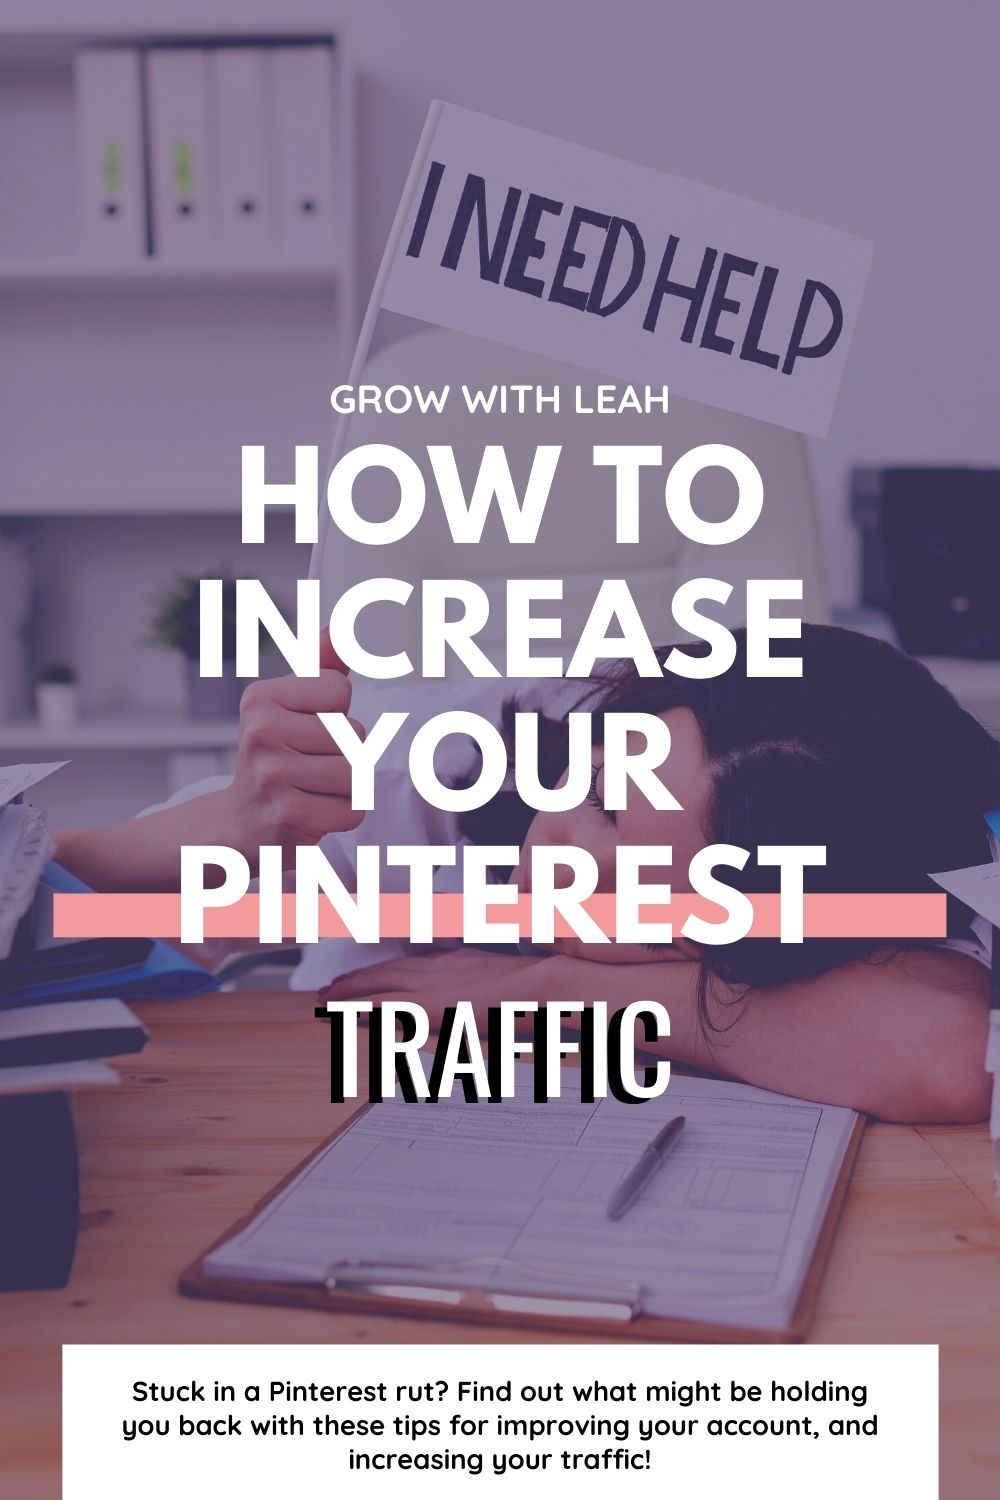 Are you struggling with Pinterest Marketing? We've all been there. Hit a Pinterest Strategy brick wall and not known how to fix it. This post covers the best Pinterest tips and tricks that will help you post fresh content consistently, reach new people, and market your blog automatically! Sound good? Click the link! | #Pinterest #socialmedia #pinterestmarketing